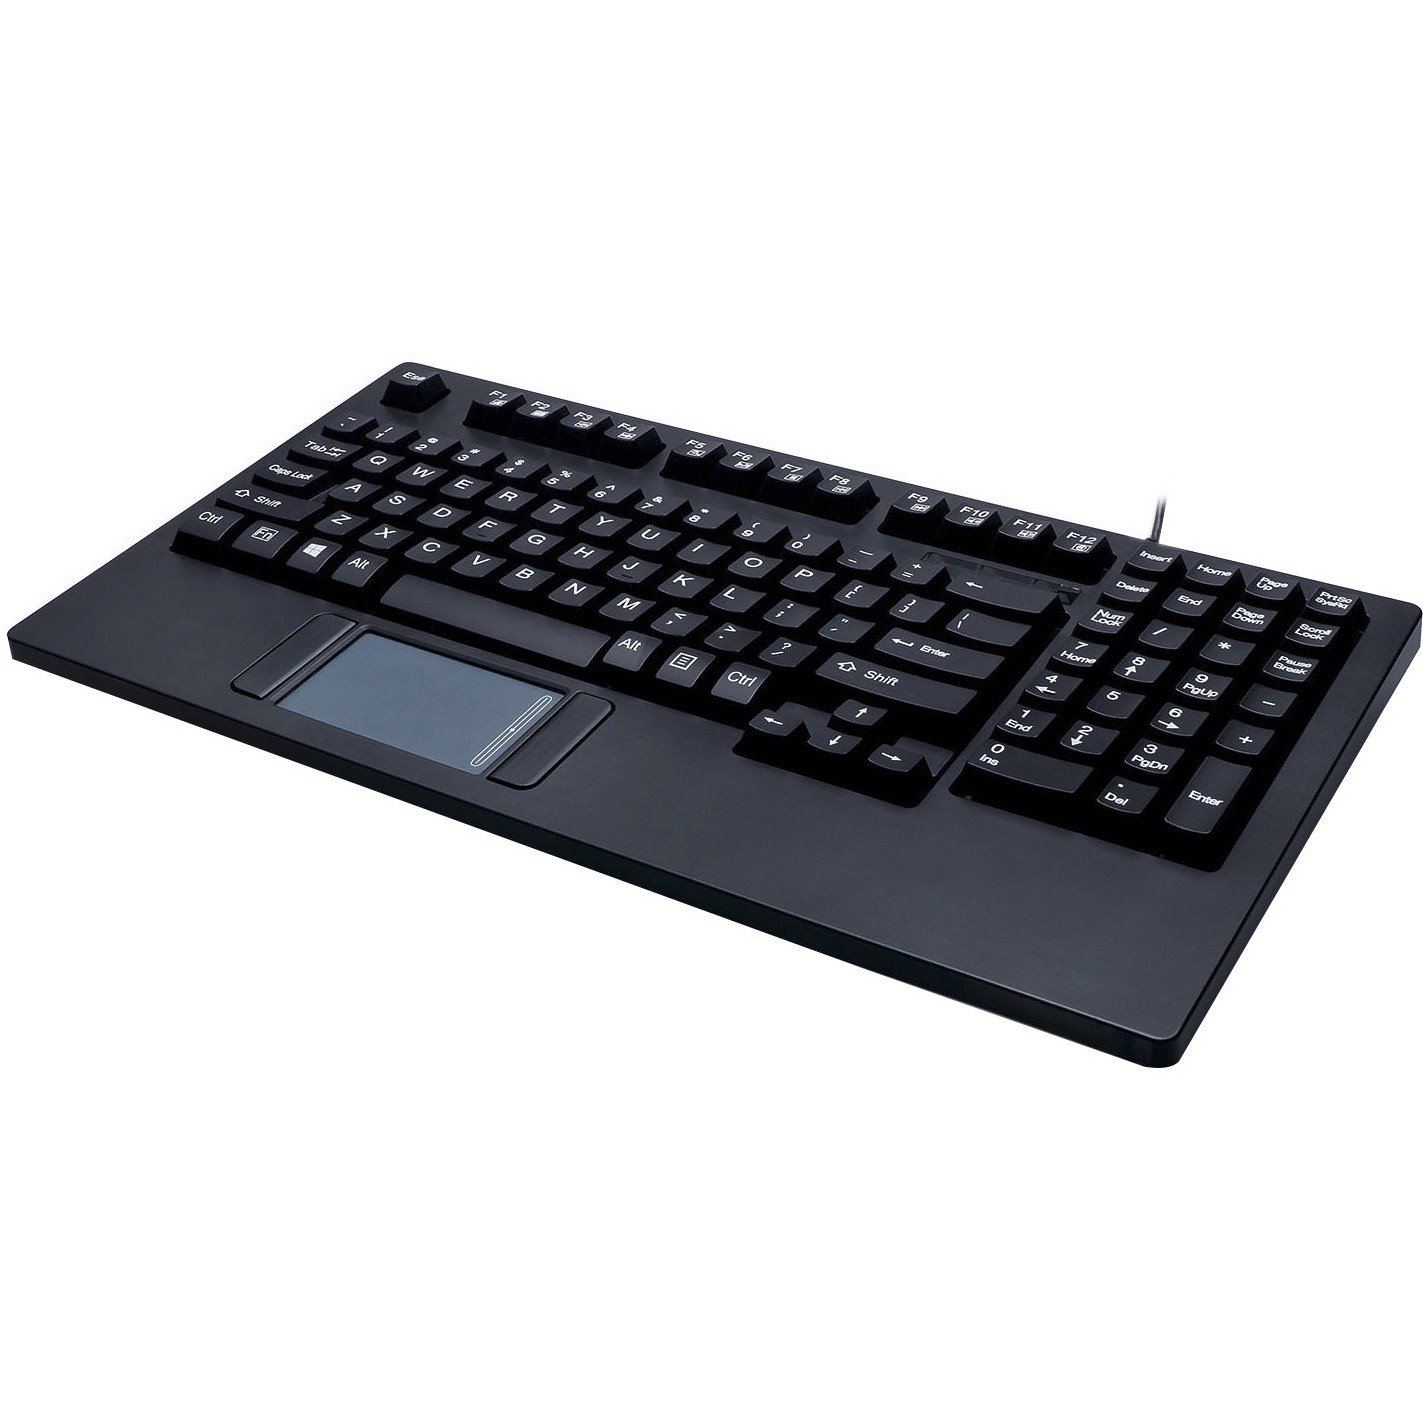 Adesso EasyTouch AKB-425UB Keyboard - Cable Connectivity - USB Interface - TouchPad - English (US) - Black